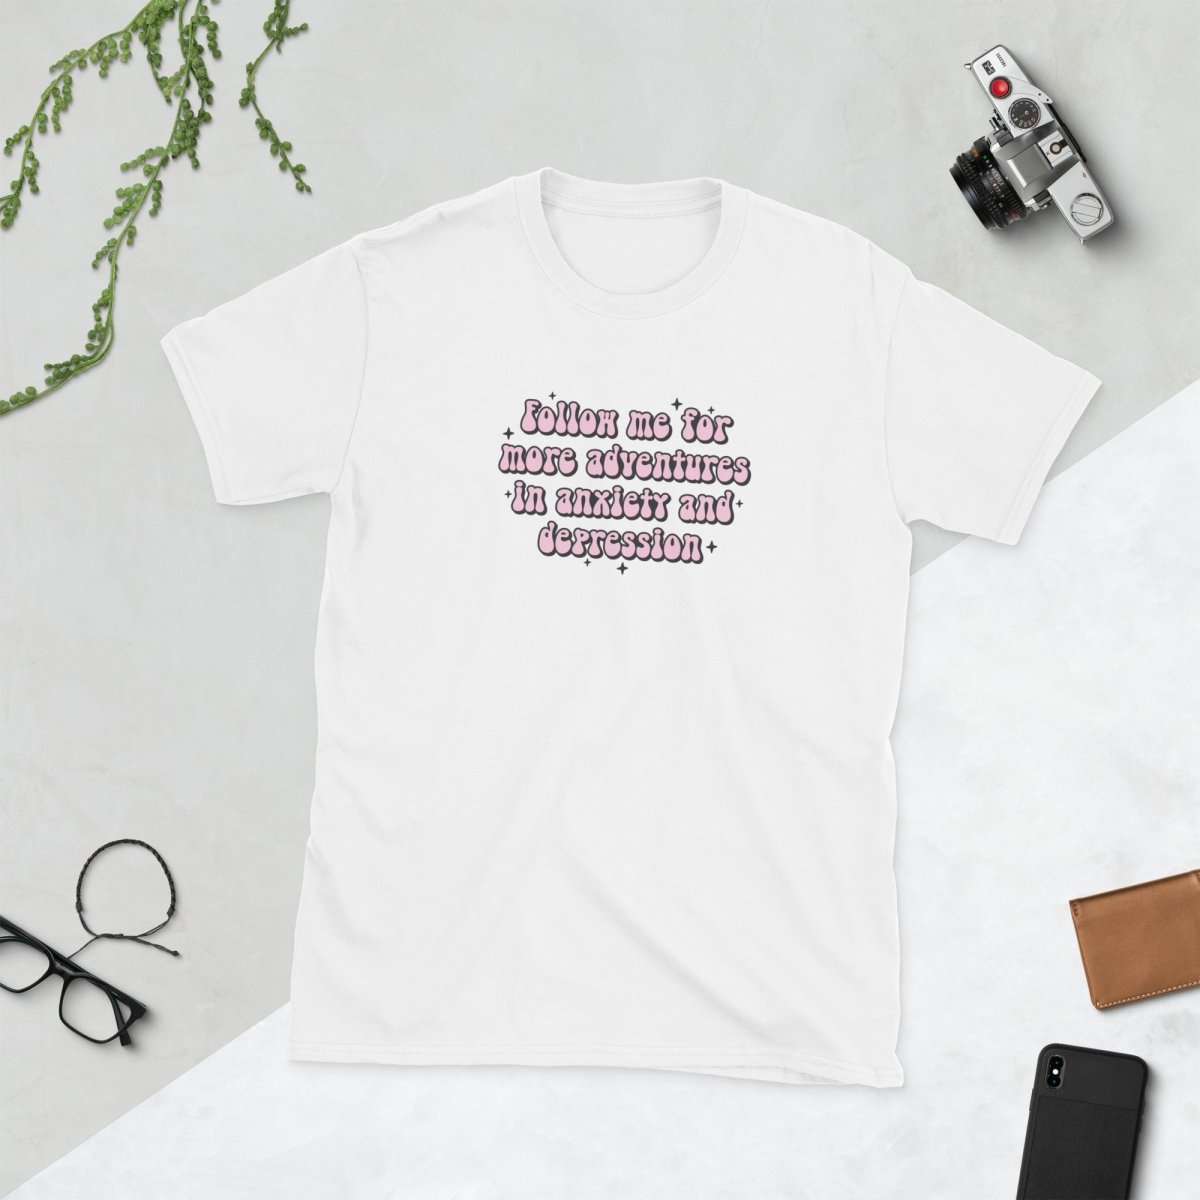 Follow Me For Adventures In Anxiety And Depression Short-Sleeve Unisex T-Shirt - Cotton Plus Cream